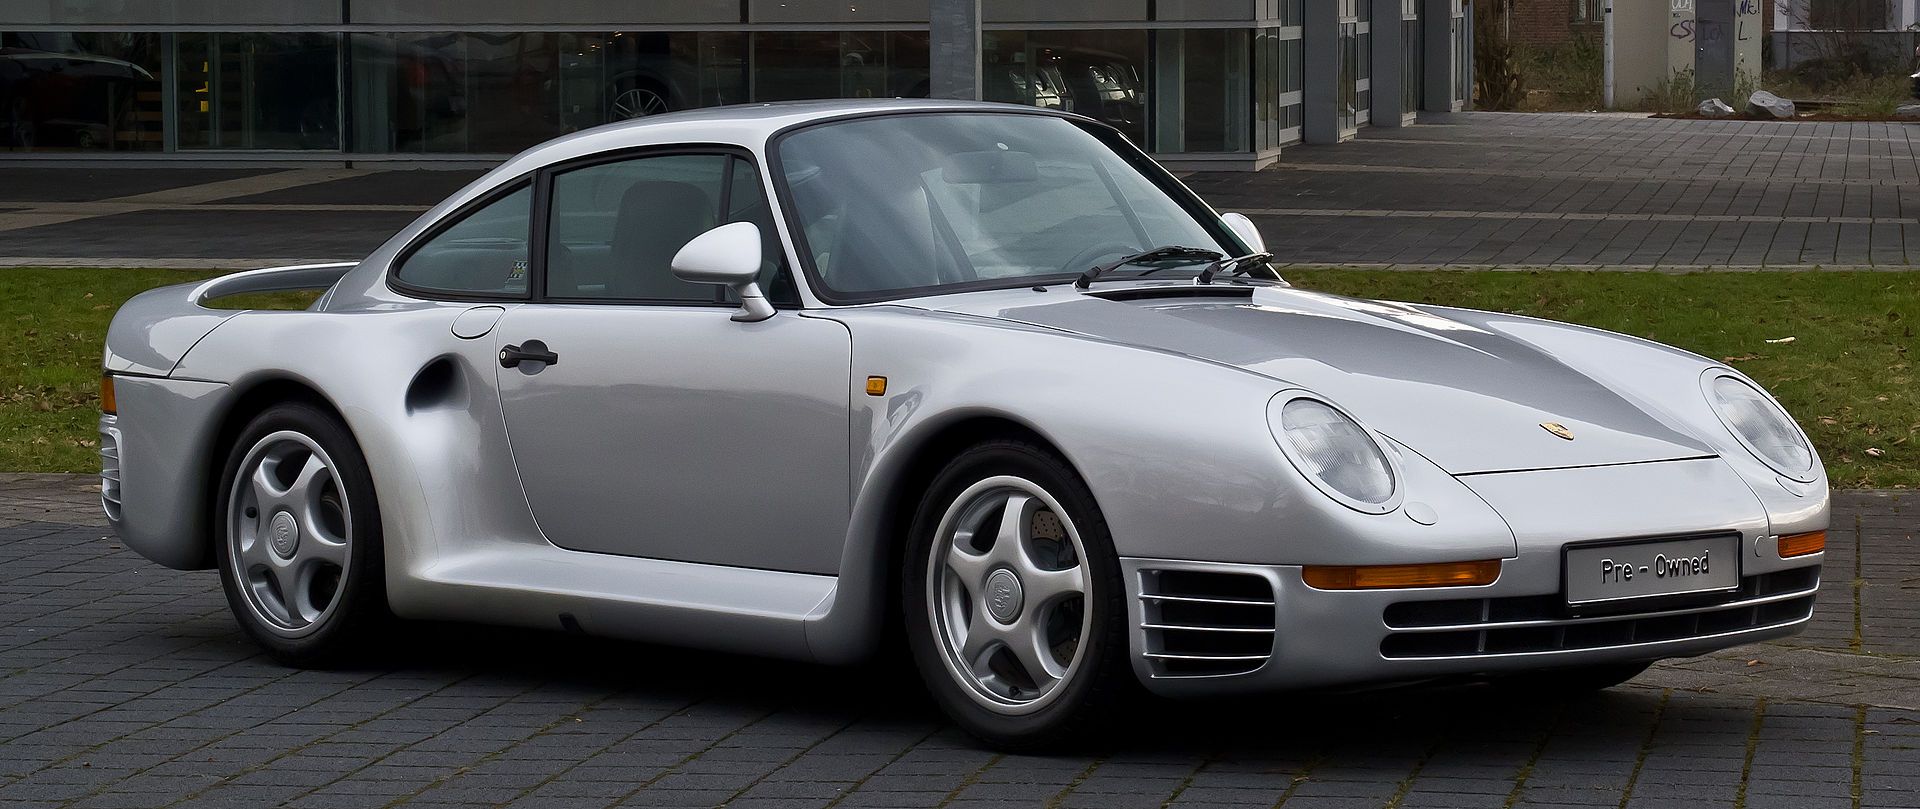 1983 Porsche 959 owned by Jerry Seinfeld 